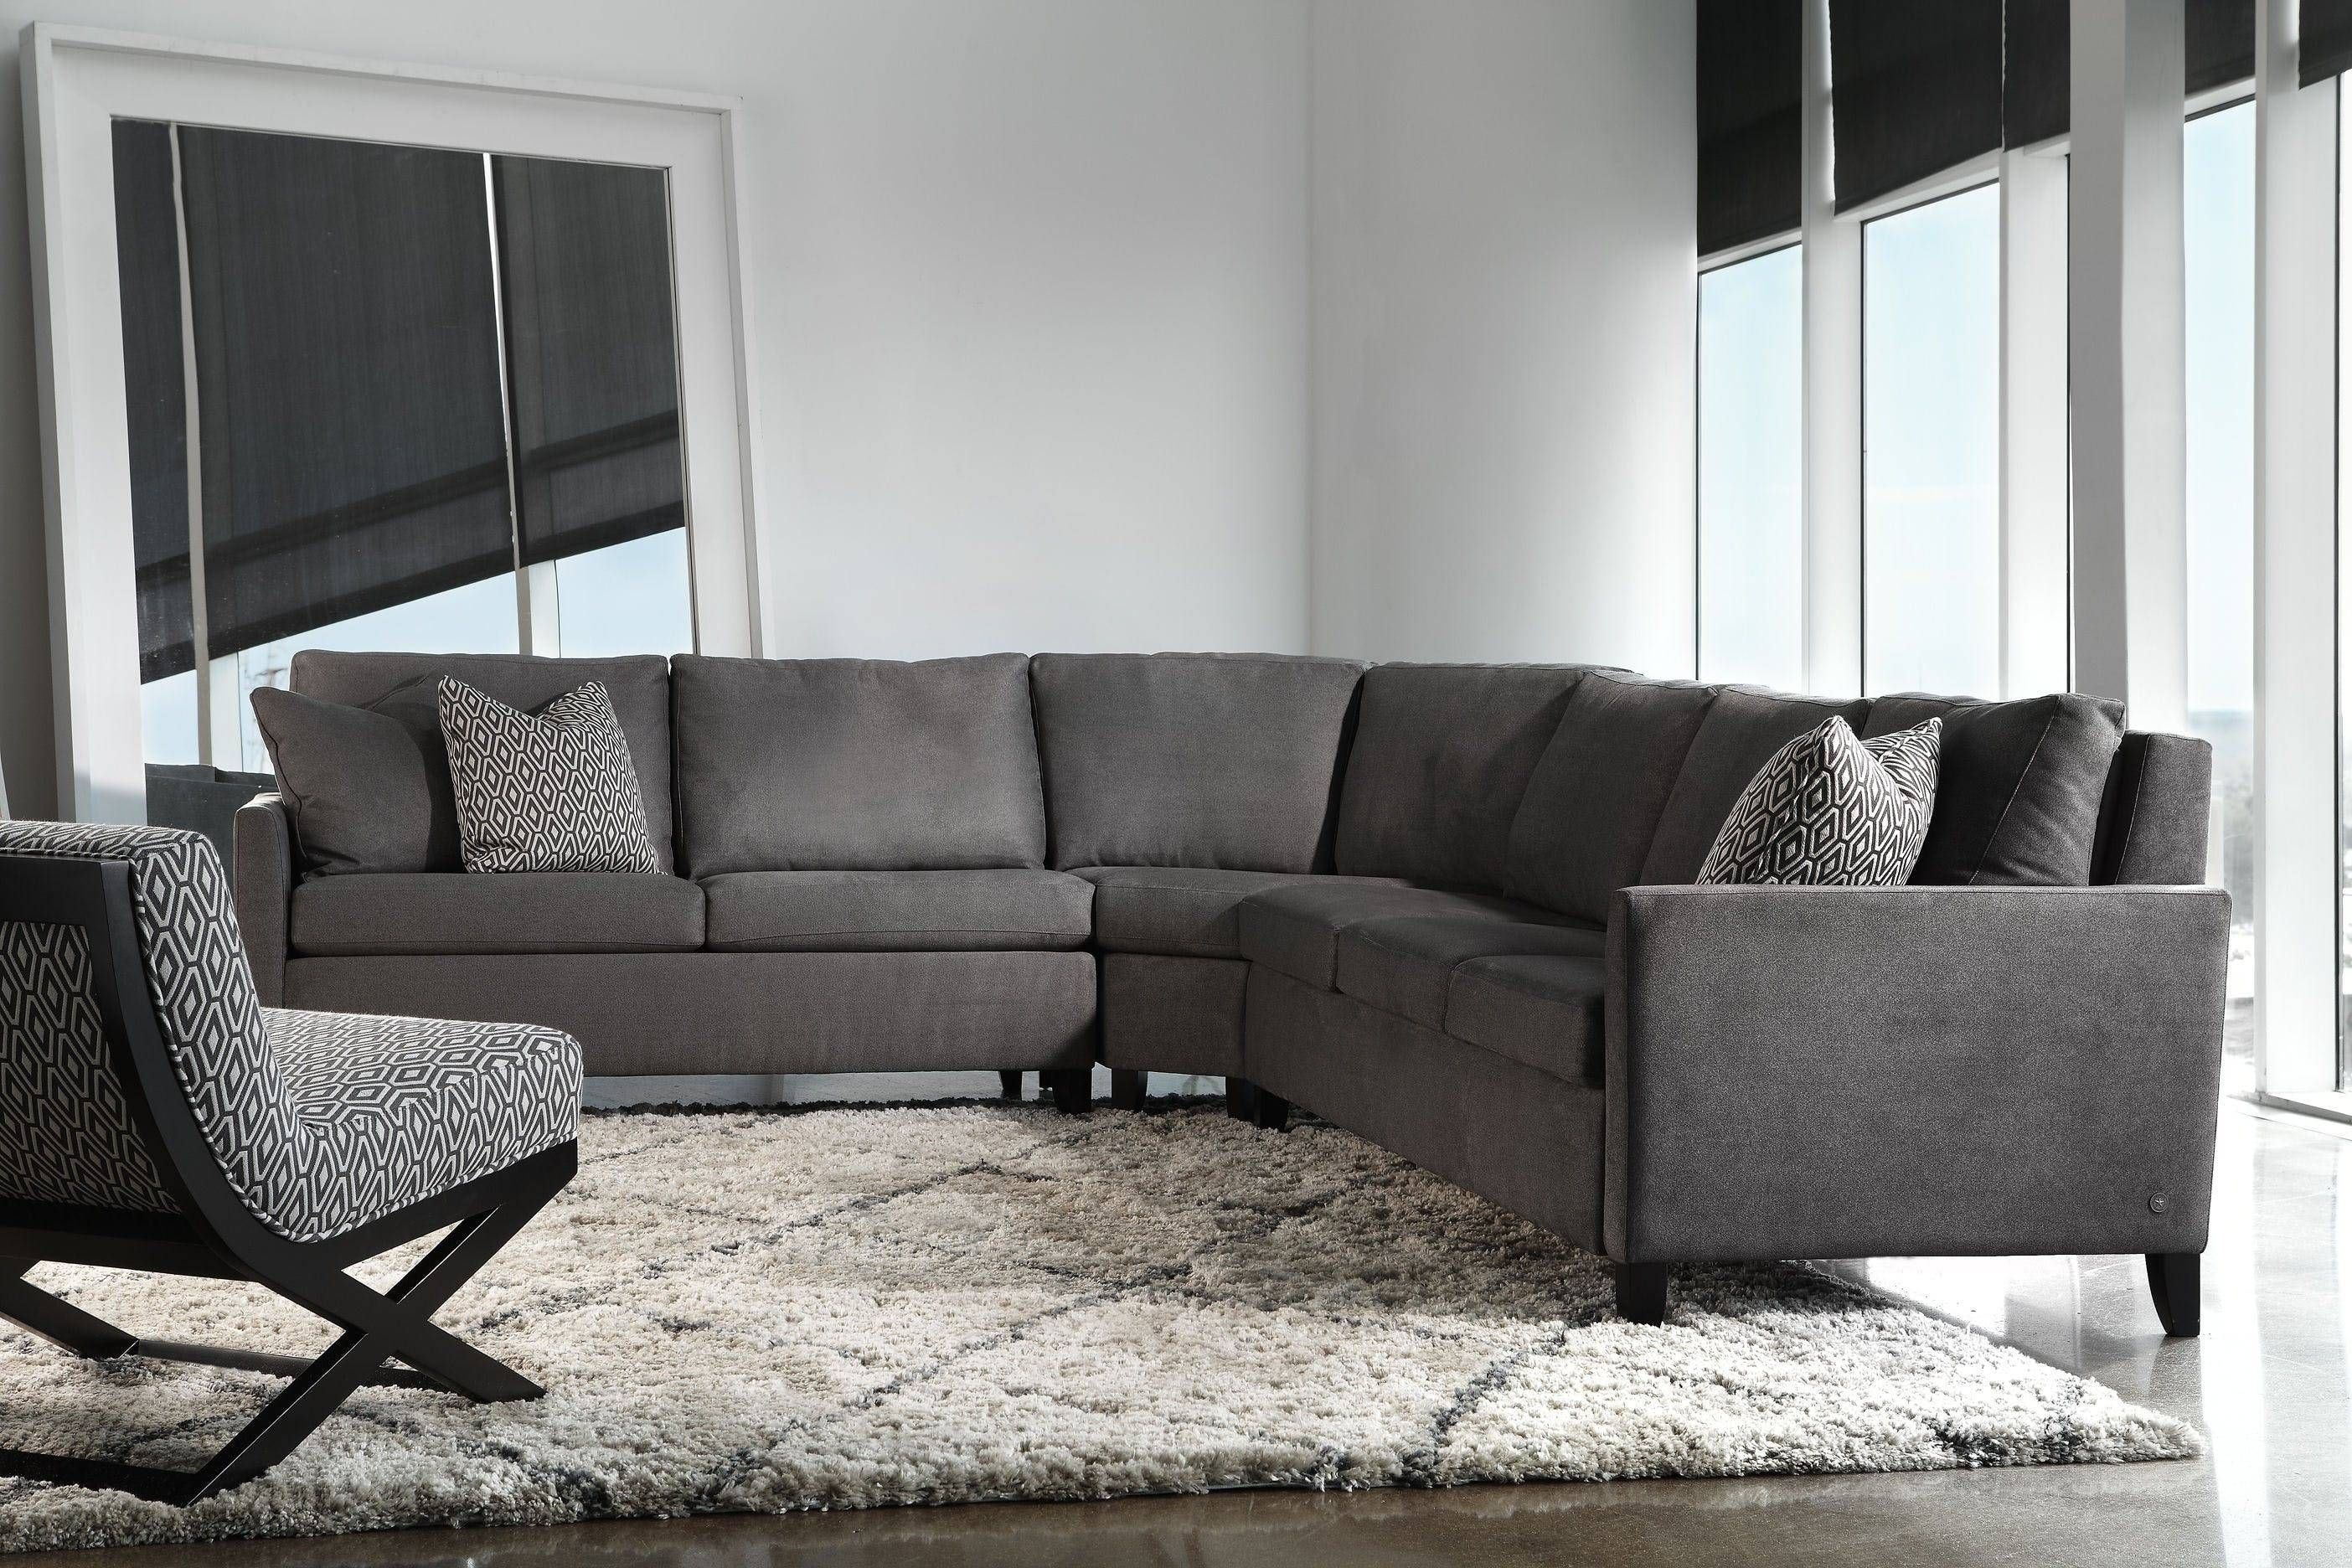 Furniture: Mesmerizing Costco Sectionals Sofa For Cozy Living Room For Macys Leather Sofas Sectionals (View 15 of 25)